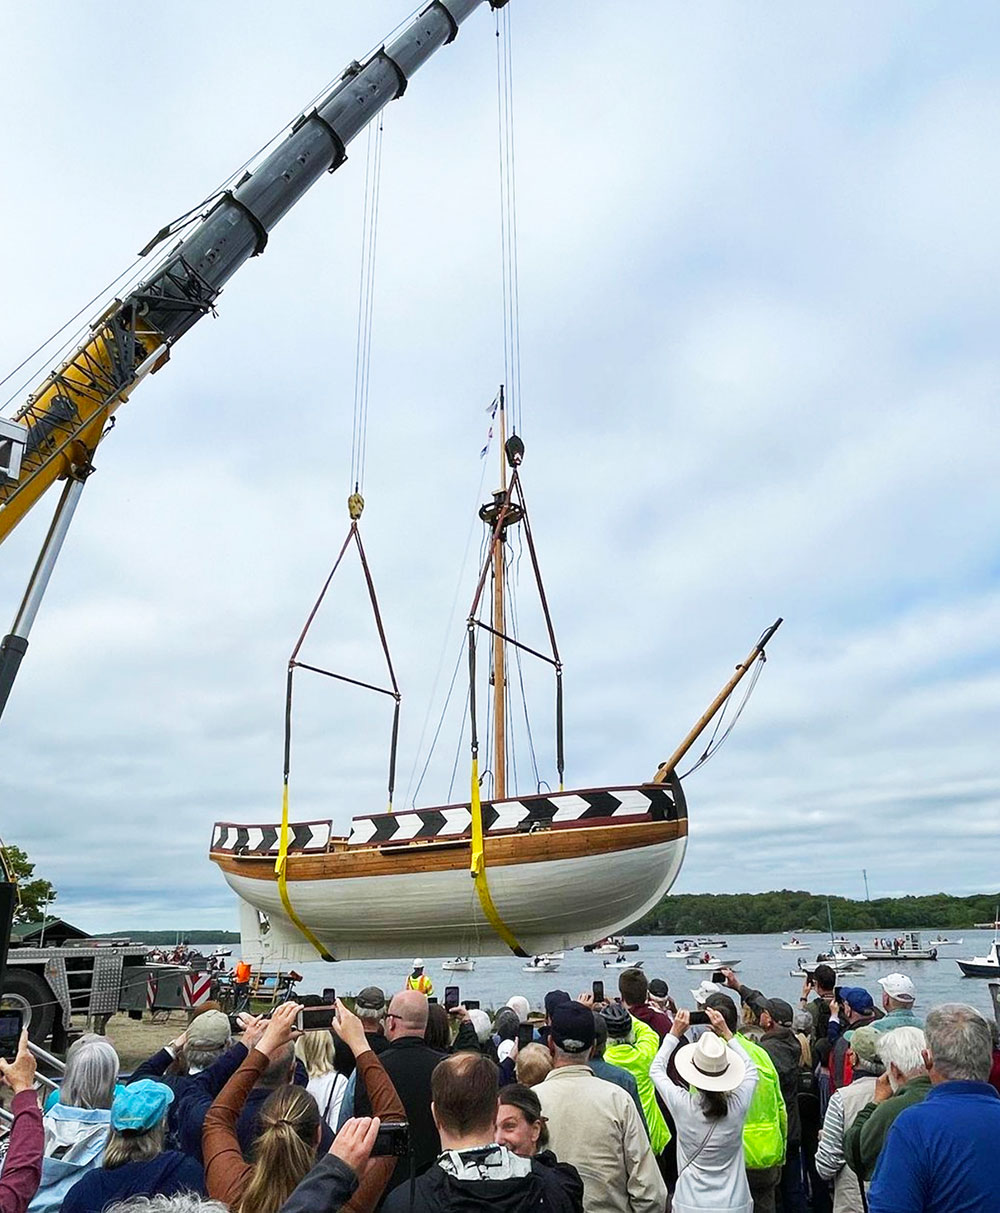 A replica of the Virginia is launched in Bath, Maine